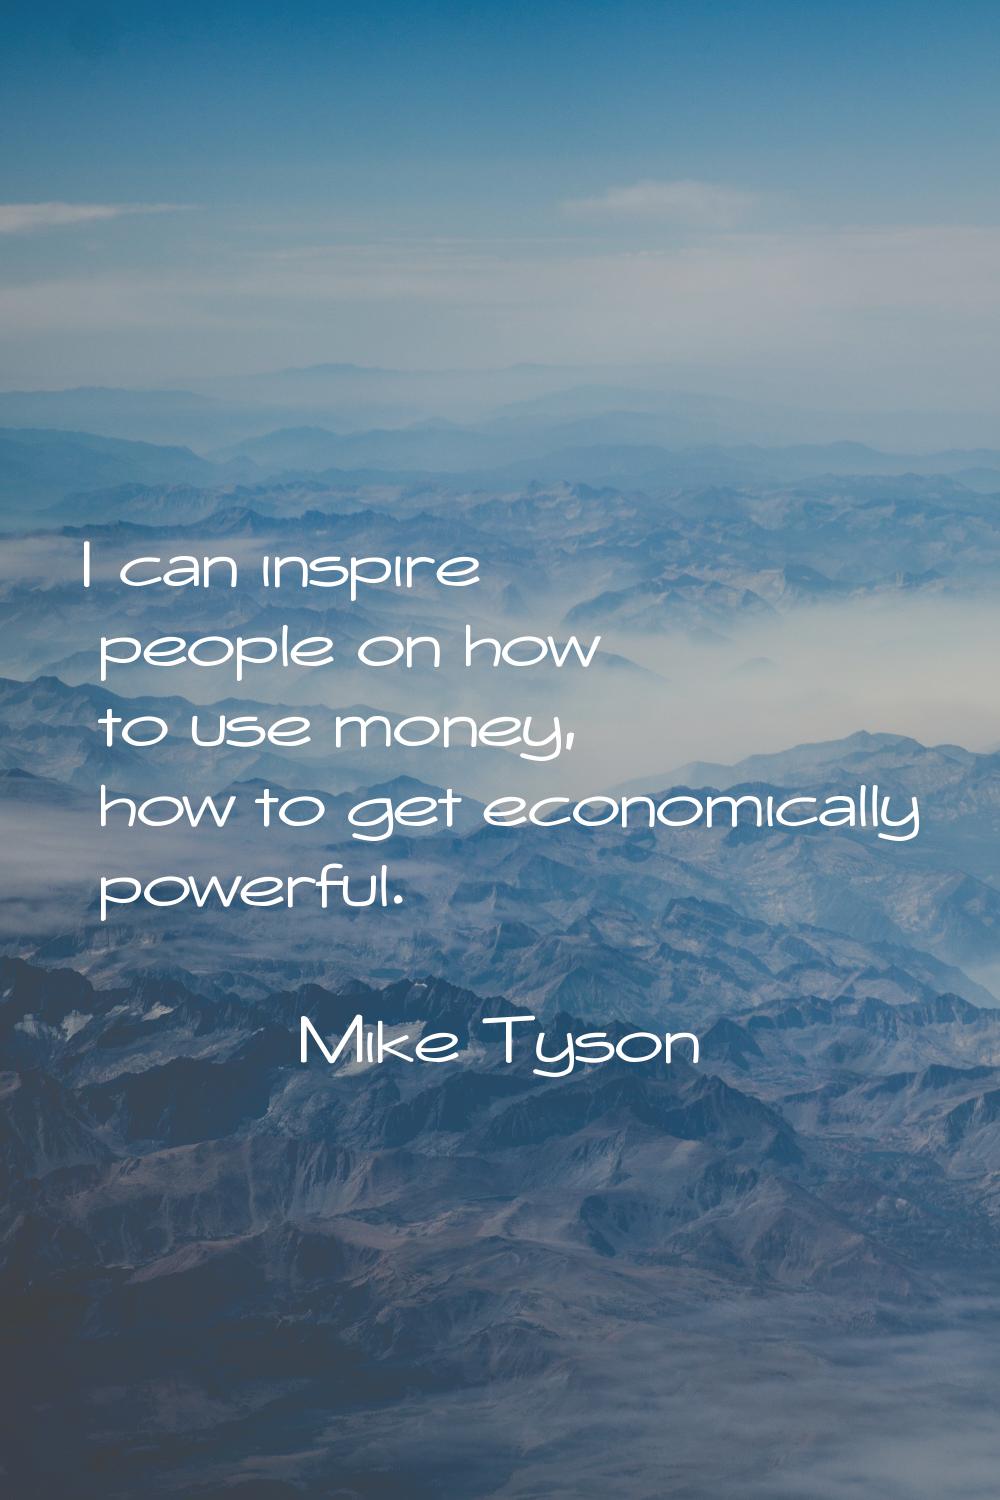 I can inspire people on how to use money, how to get economically powerful.